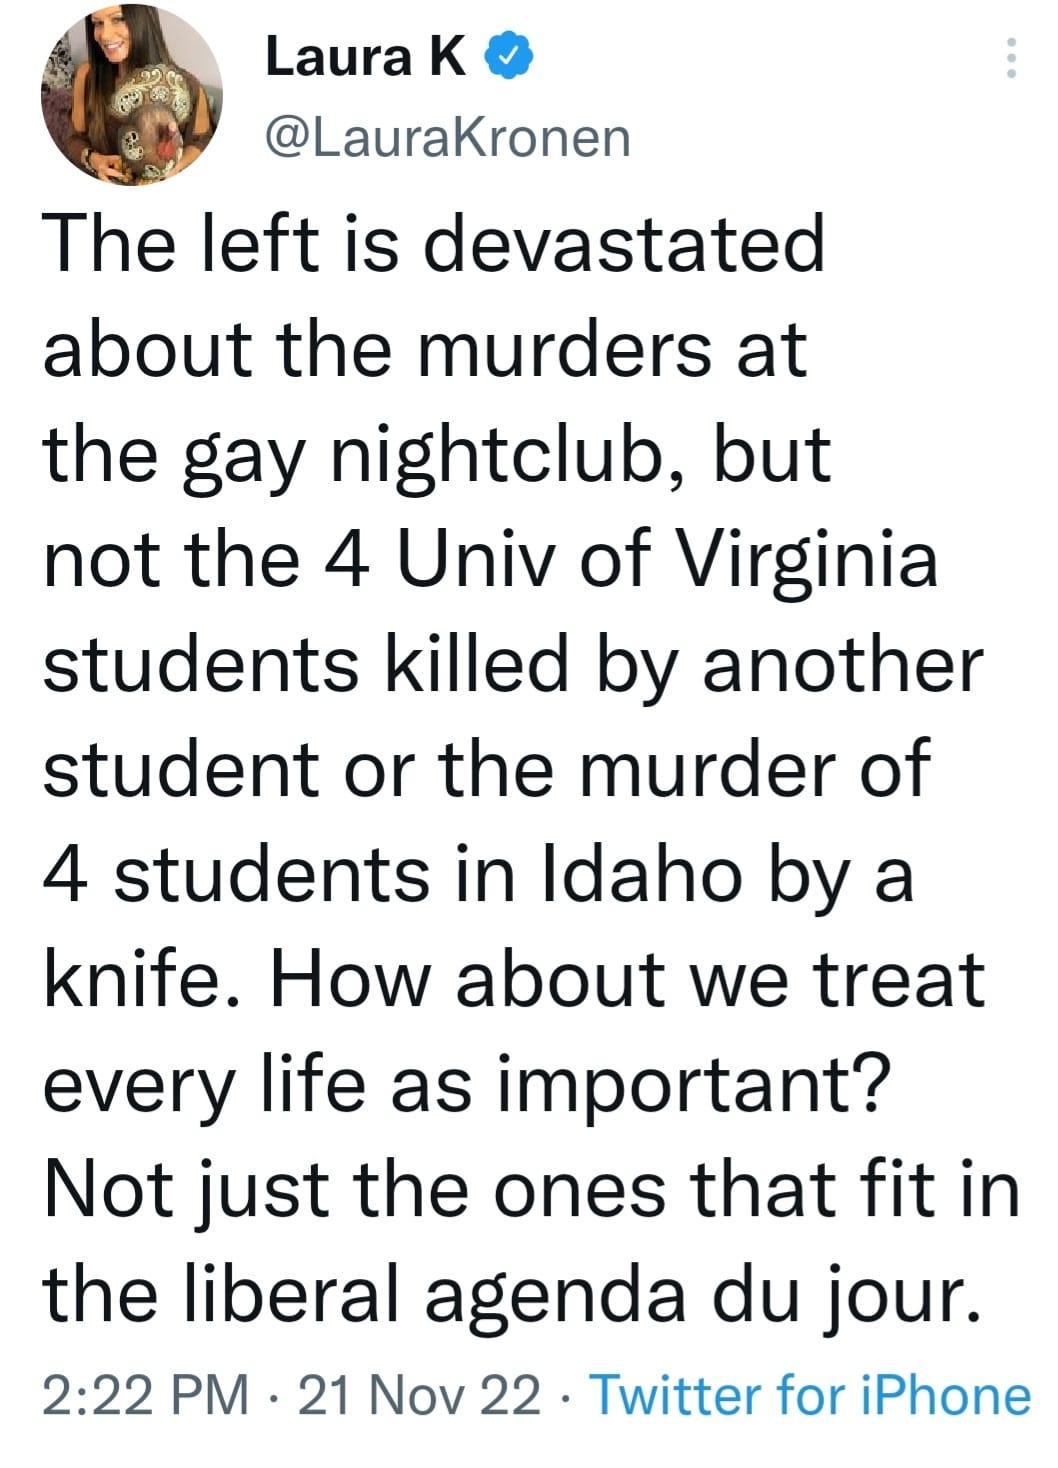 May be an image of 1 person and text that says 'Laura K @LauraKronen The left is devastated about the murders at the gay nightclub, but not the 4 Univ of Virginia students killed by another student or the murder of 4 students in Idaho by a knife. How about we treat every life as important? Not just the ones that fit in the liberal agenda du jour. 2:22 PM 21 Nov 22 Twitter for iPhone'